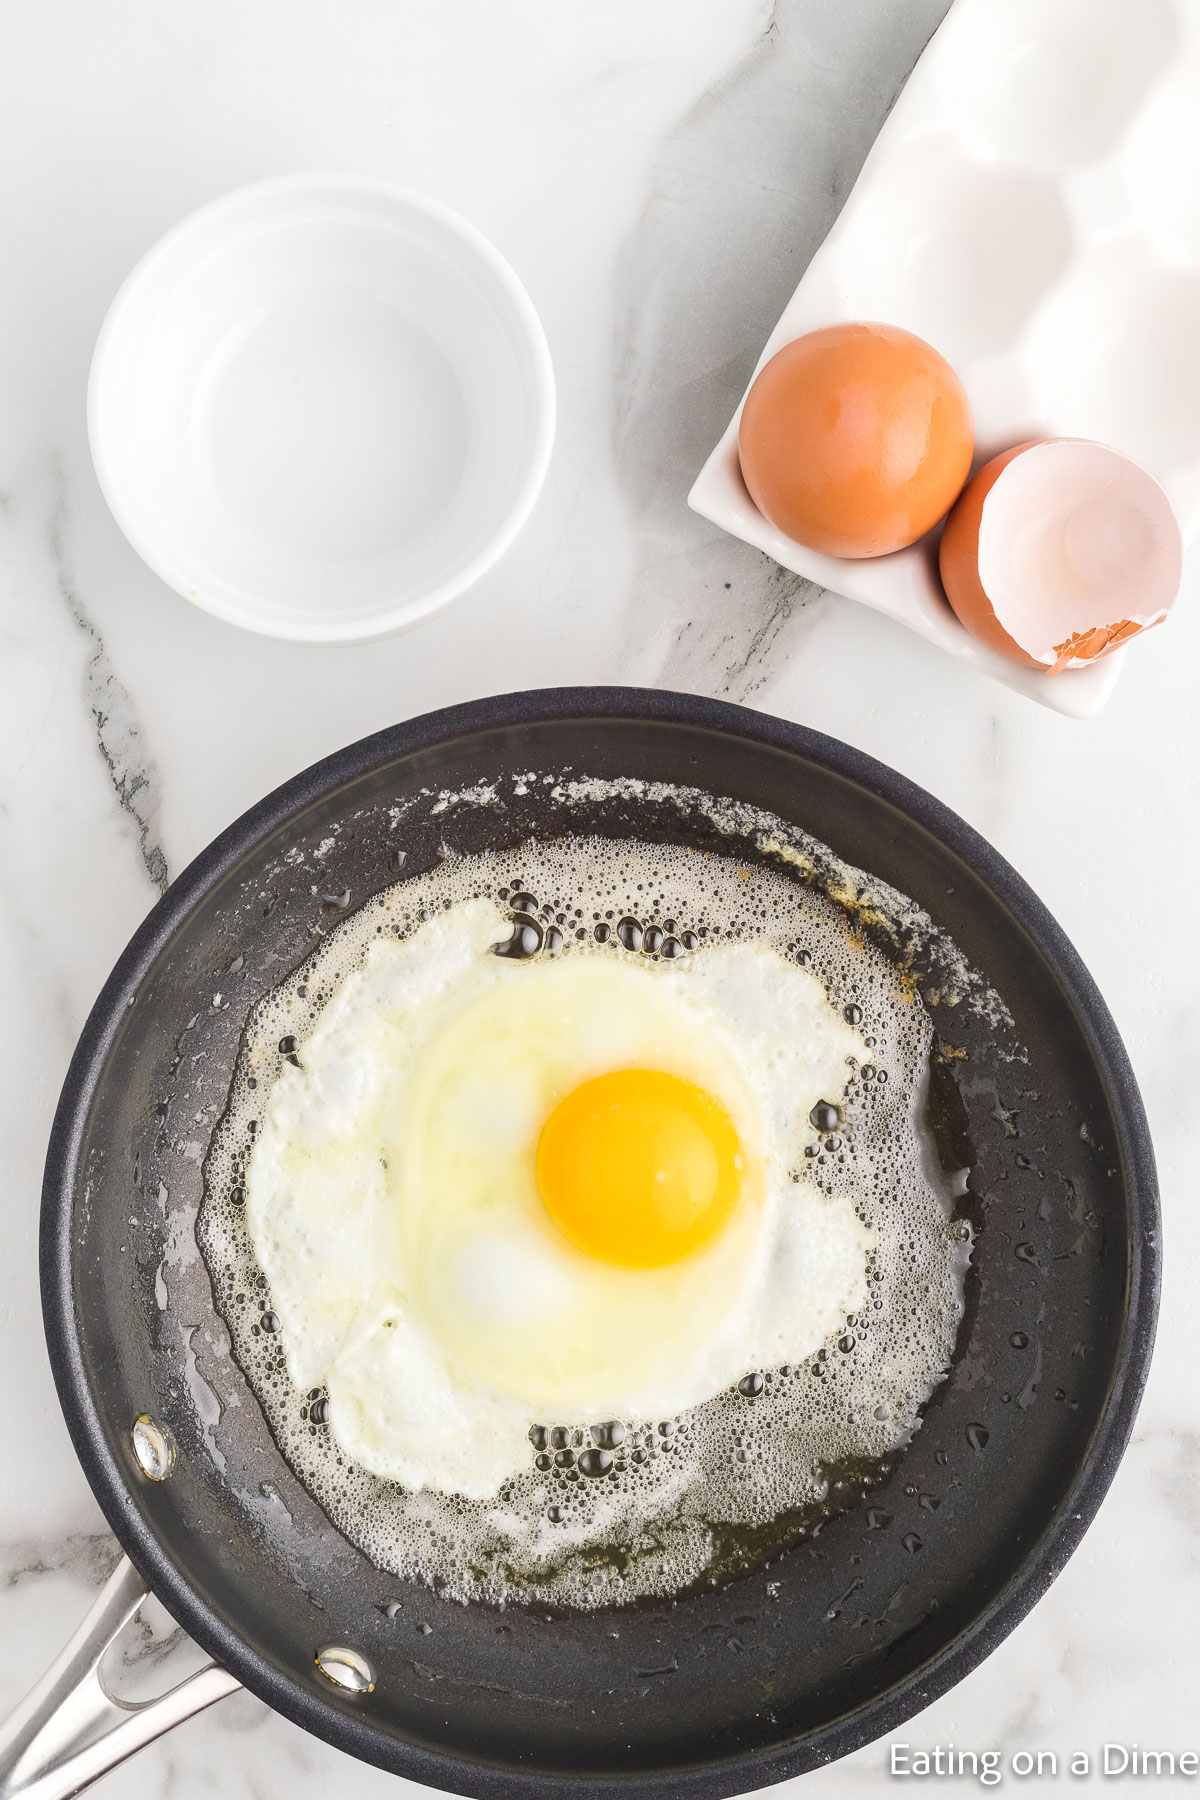 How to Fry an Egg - From Runny Yolks to Over Hard